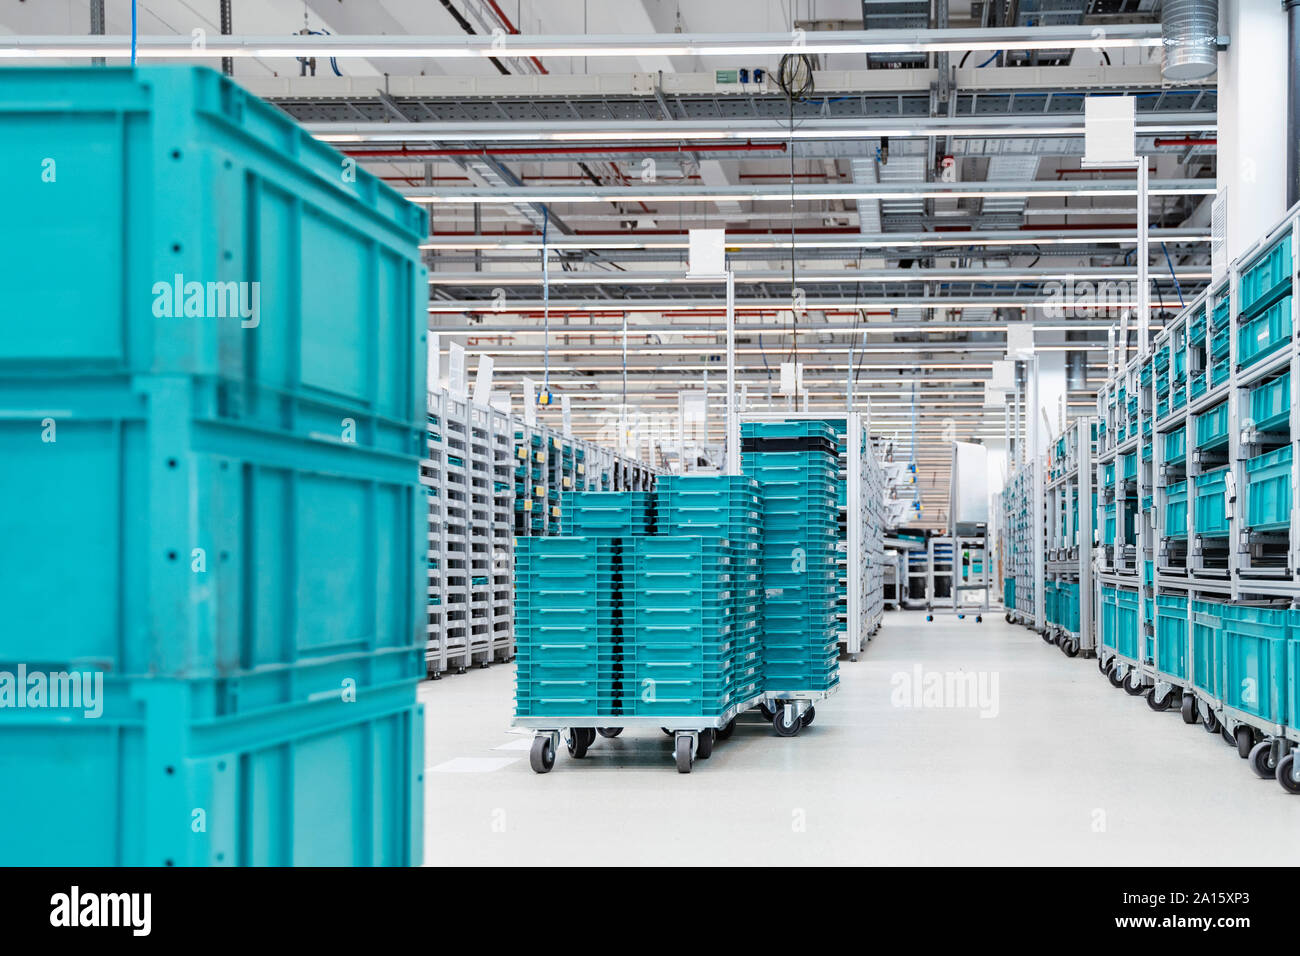 Turquoise colored containers inside modern factory warehouse, Stuttgart, Germany Stock Photo